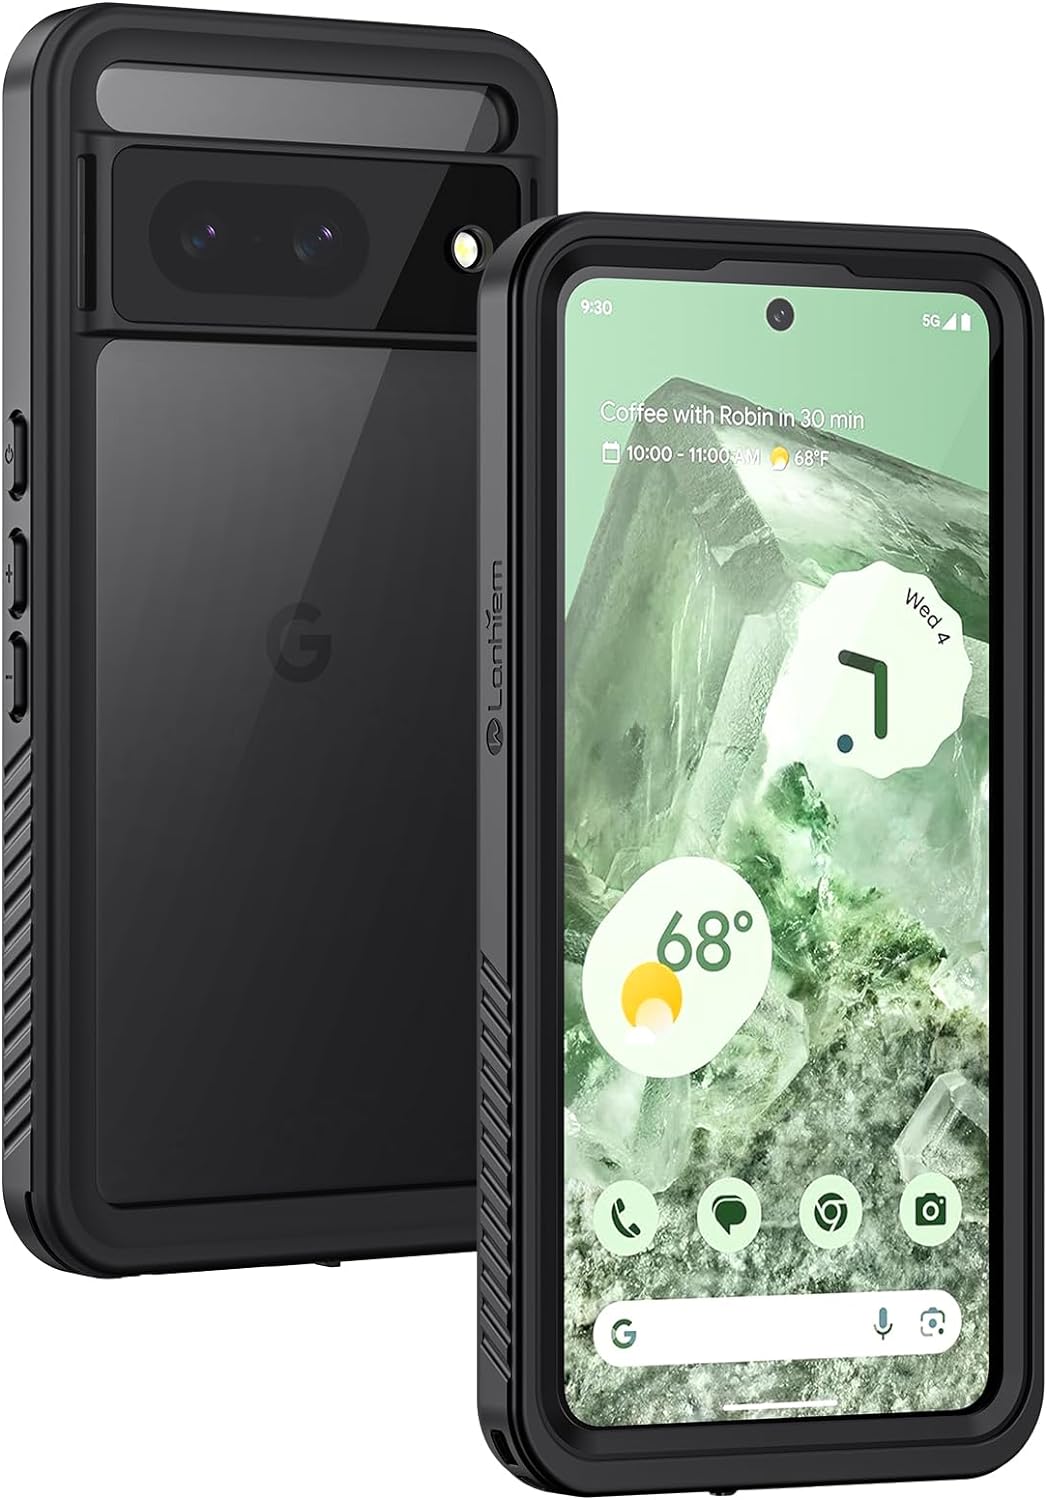 Lanhiem Pixel 8 Case, IP68 Waterproof Dustproof Case with Built-in Screen Protector, Rugged Full Body Shockproof Protective Clear Cover for Google Pixel 8 6.2 Inch, Black